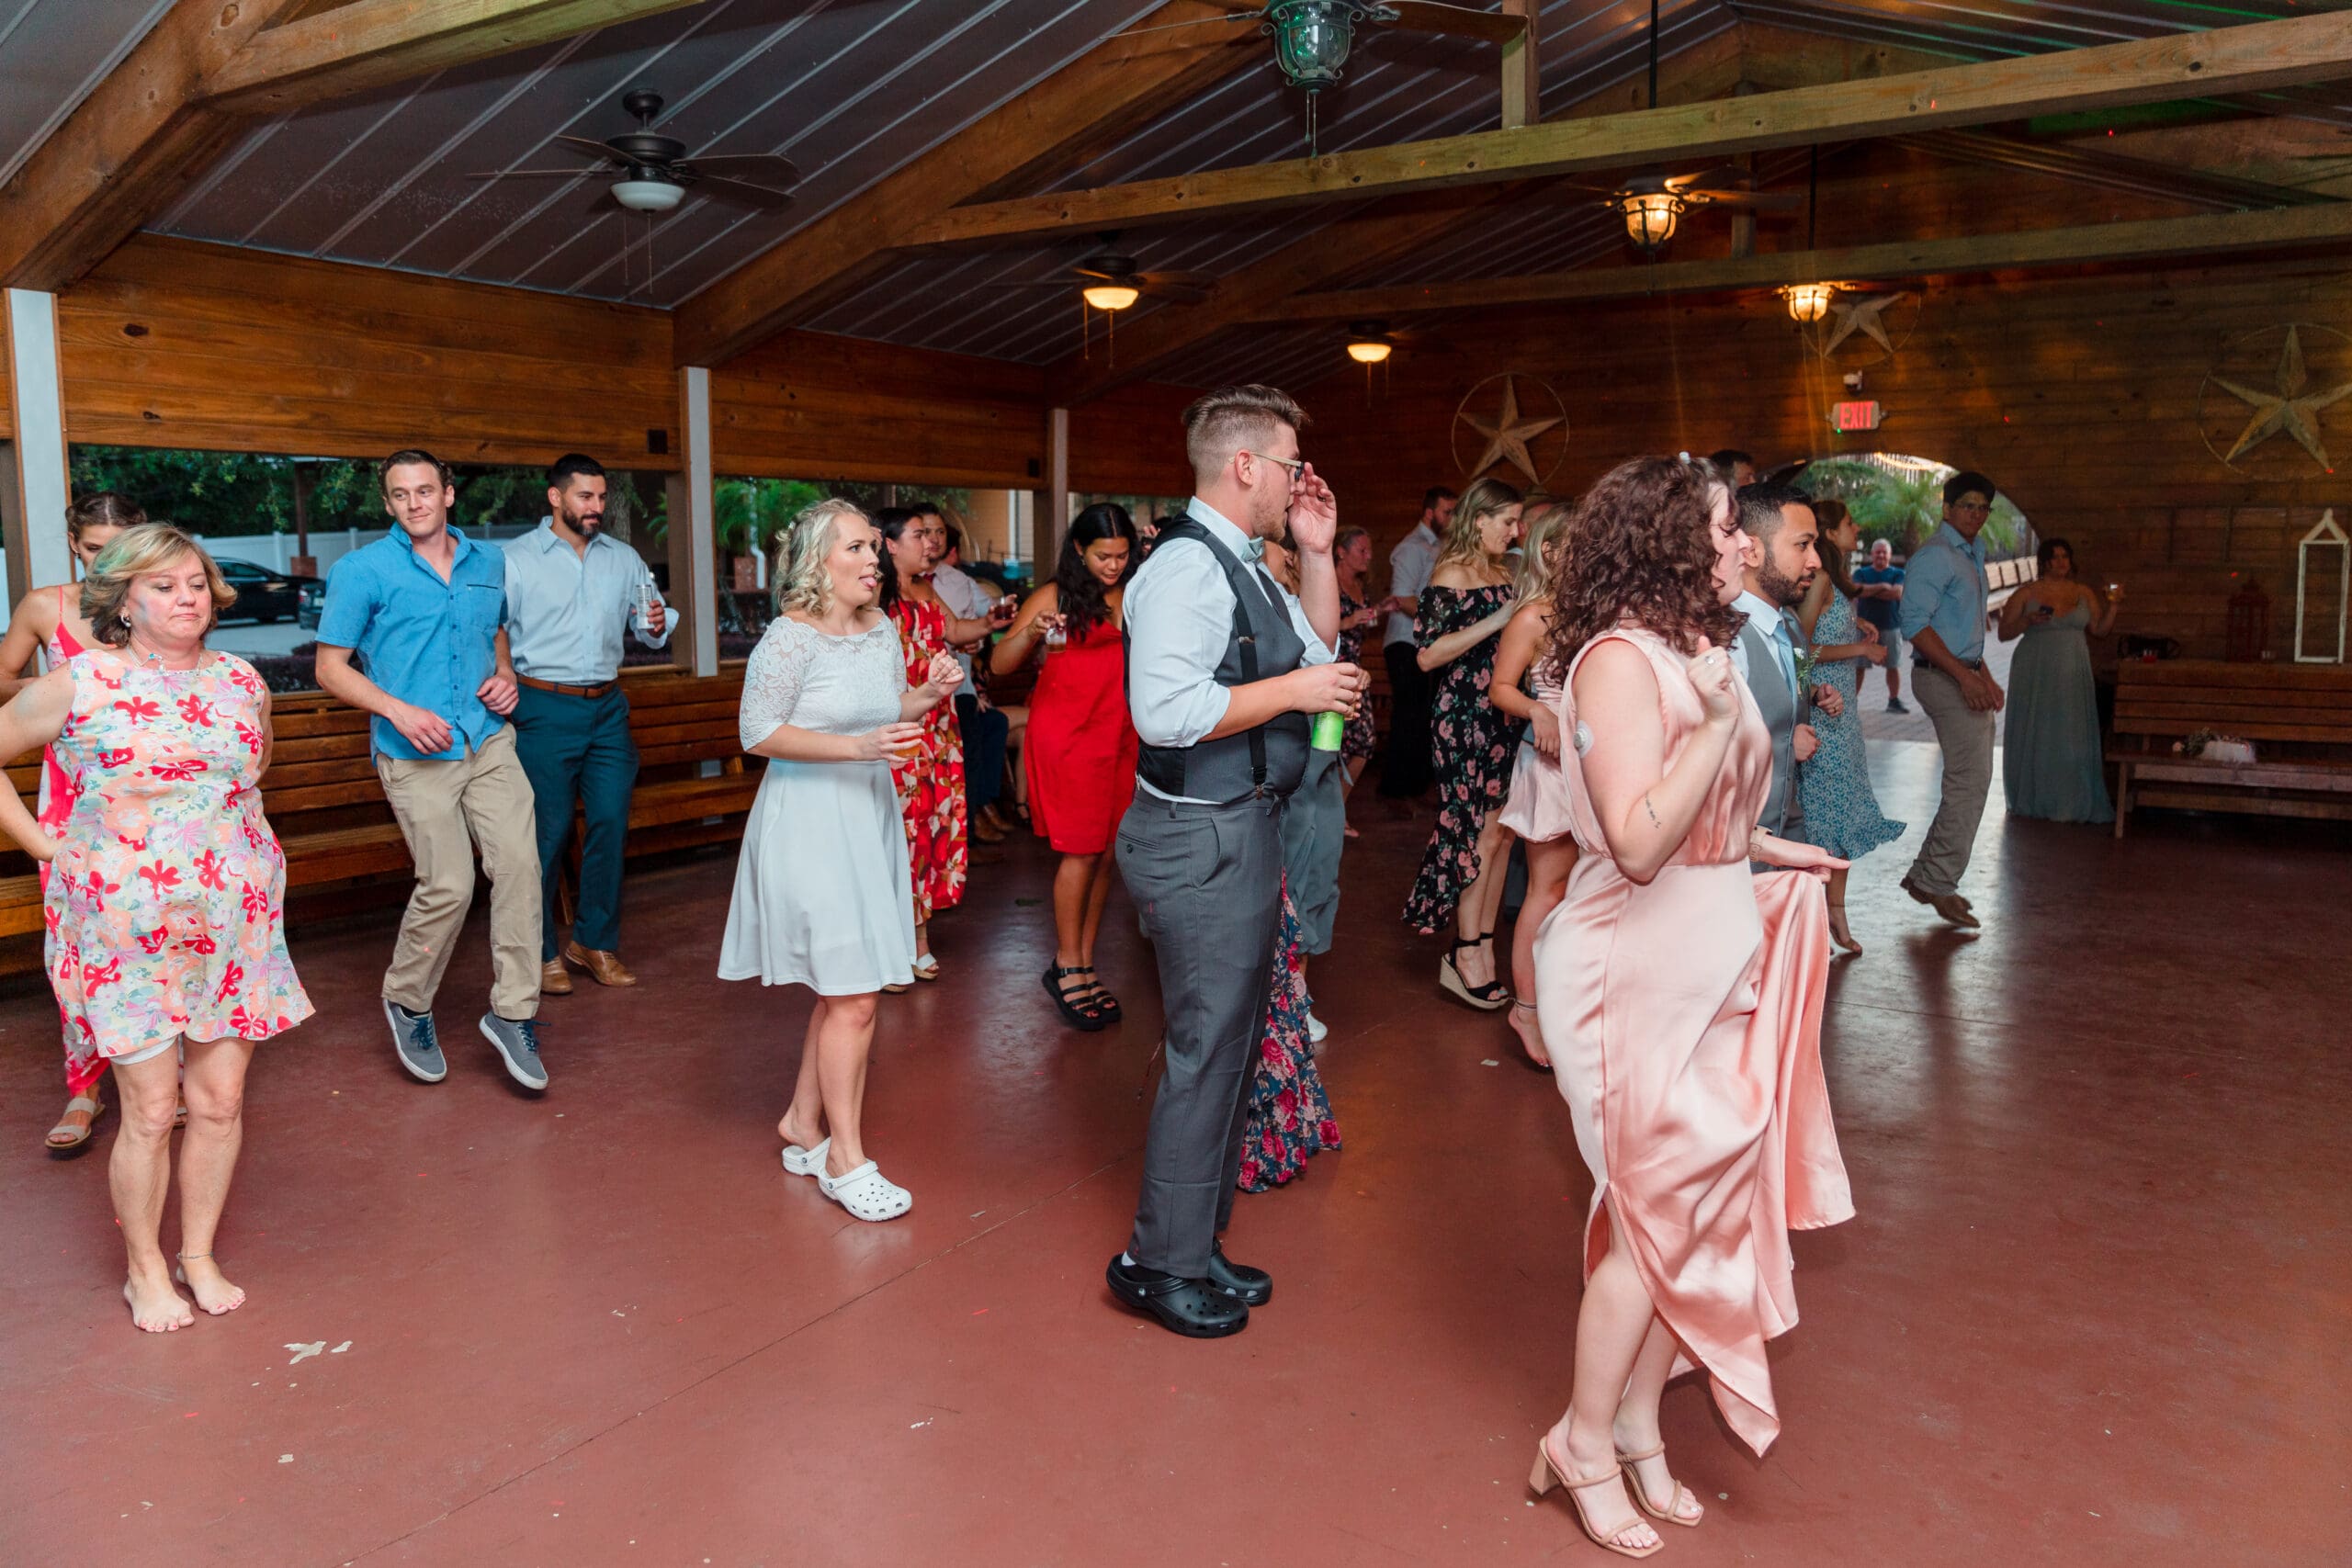 Guests doing the electric slide at the wedding reception at the Hidden Barn